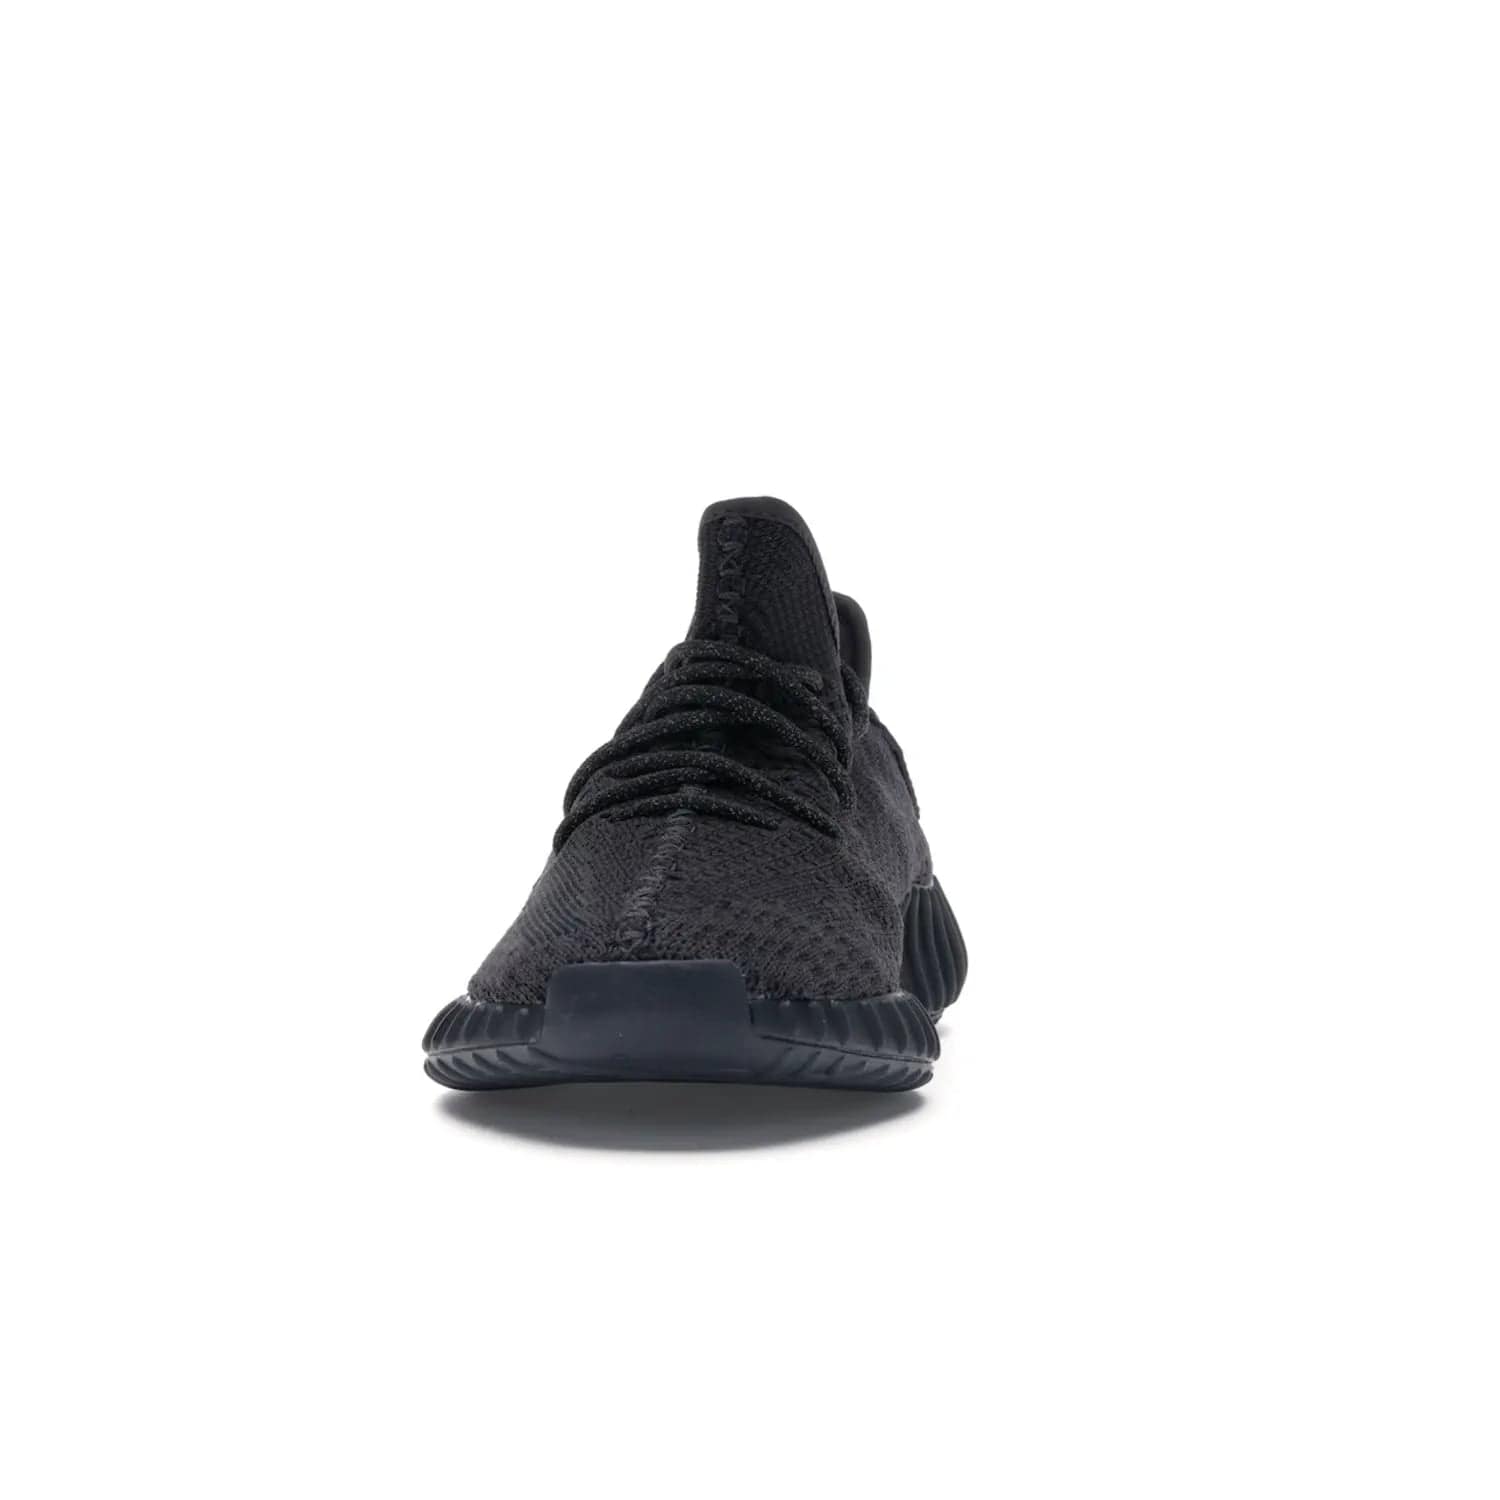 adidas Yeezy Boost 350 V2 Black (Non-Reflective) - Image 11 - Only at www.BallersClubKickz.com - A timeless, sleek silhouette crafted from quality materials. The adidas Yeezy Boost 350 V2 Black (Non-Reflective) brings style and sophistication. Get yours now!